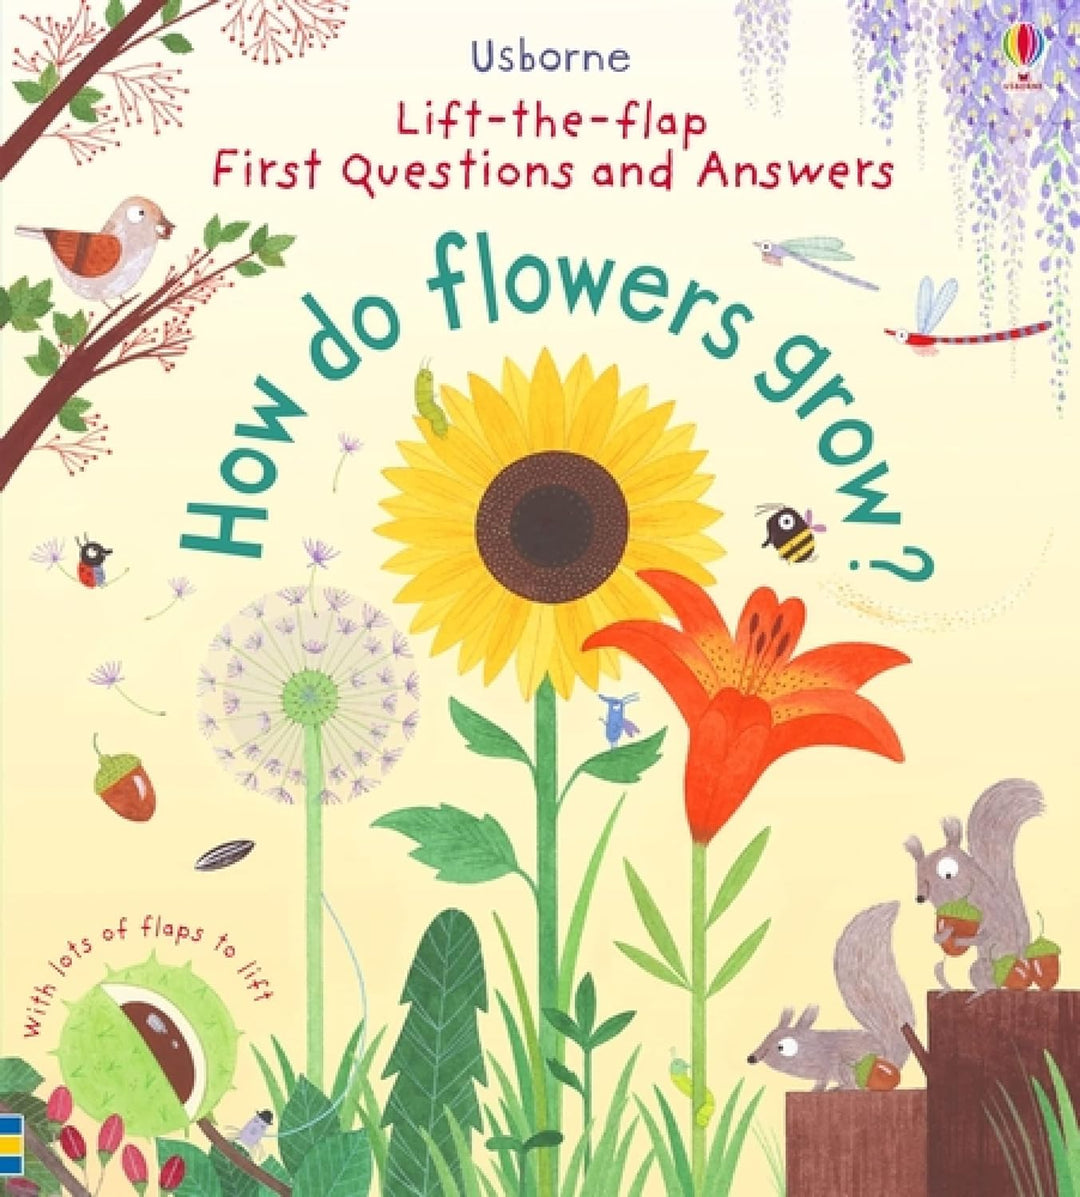 FUsborne Lift-The-Flap First Questions and Answers: How Do Flowers Grow?